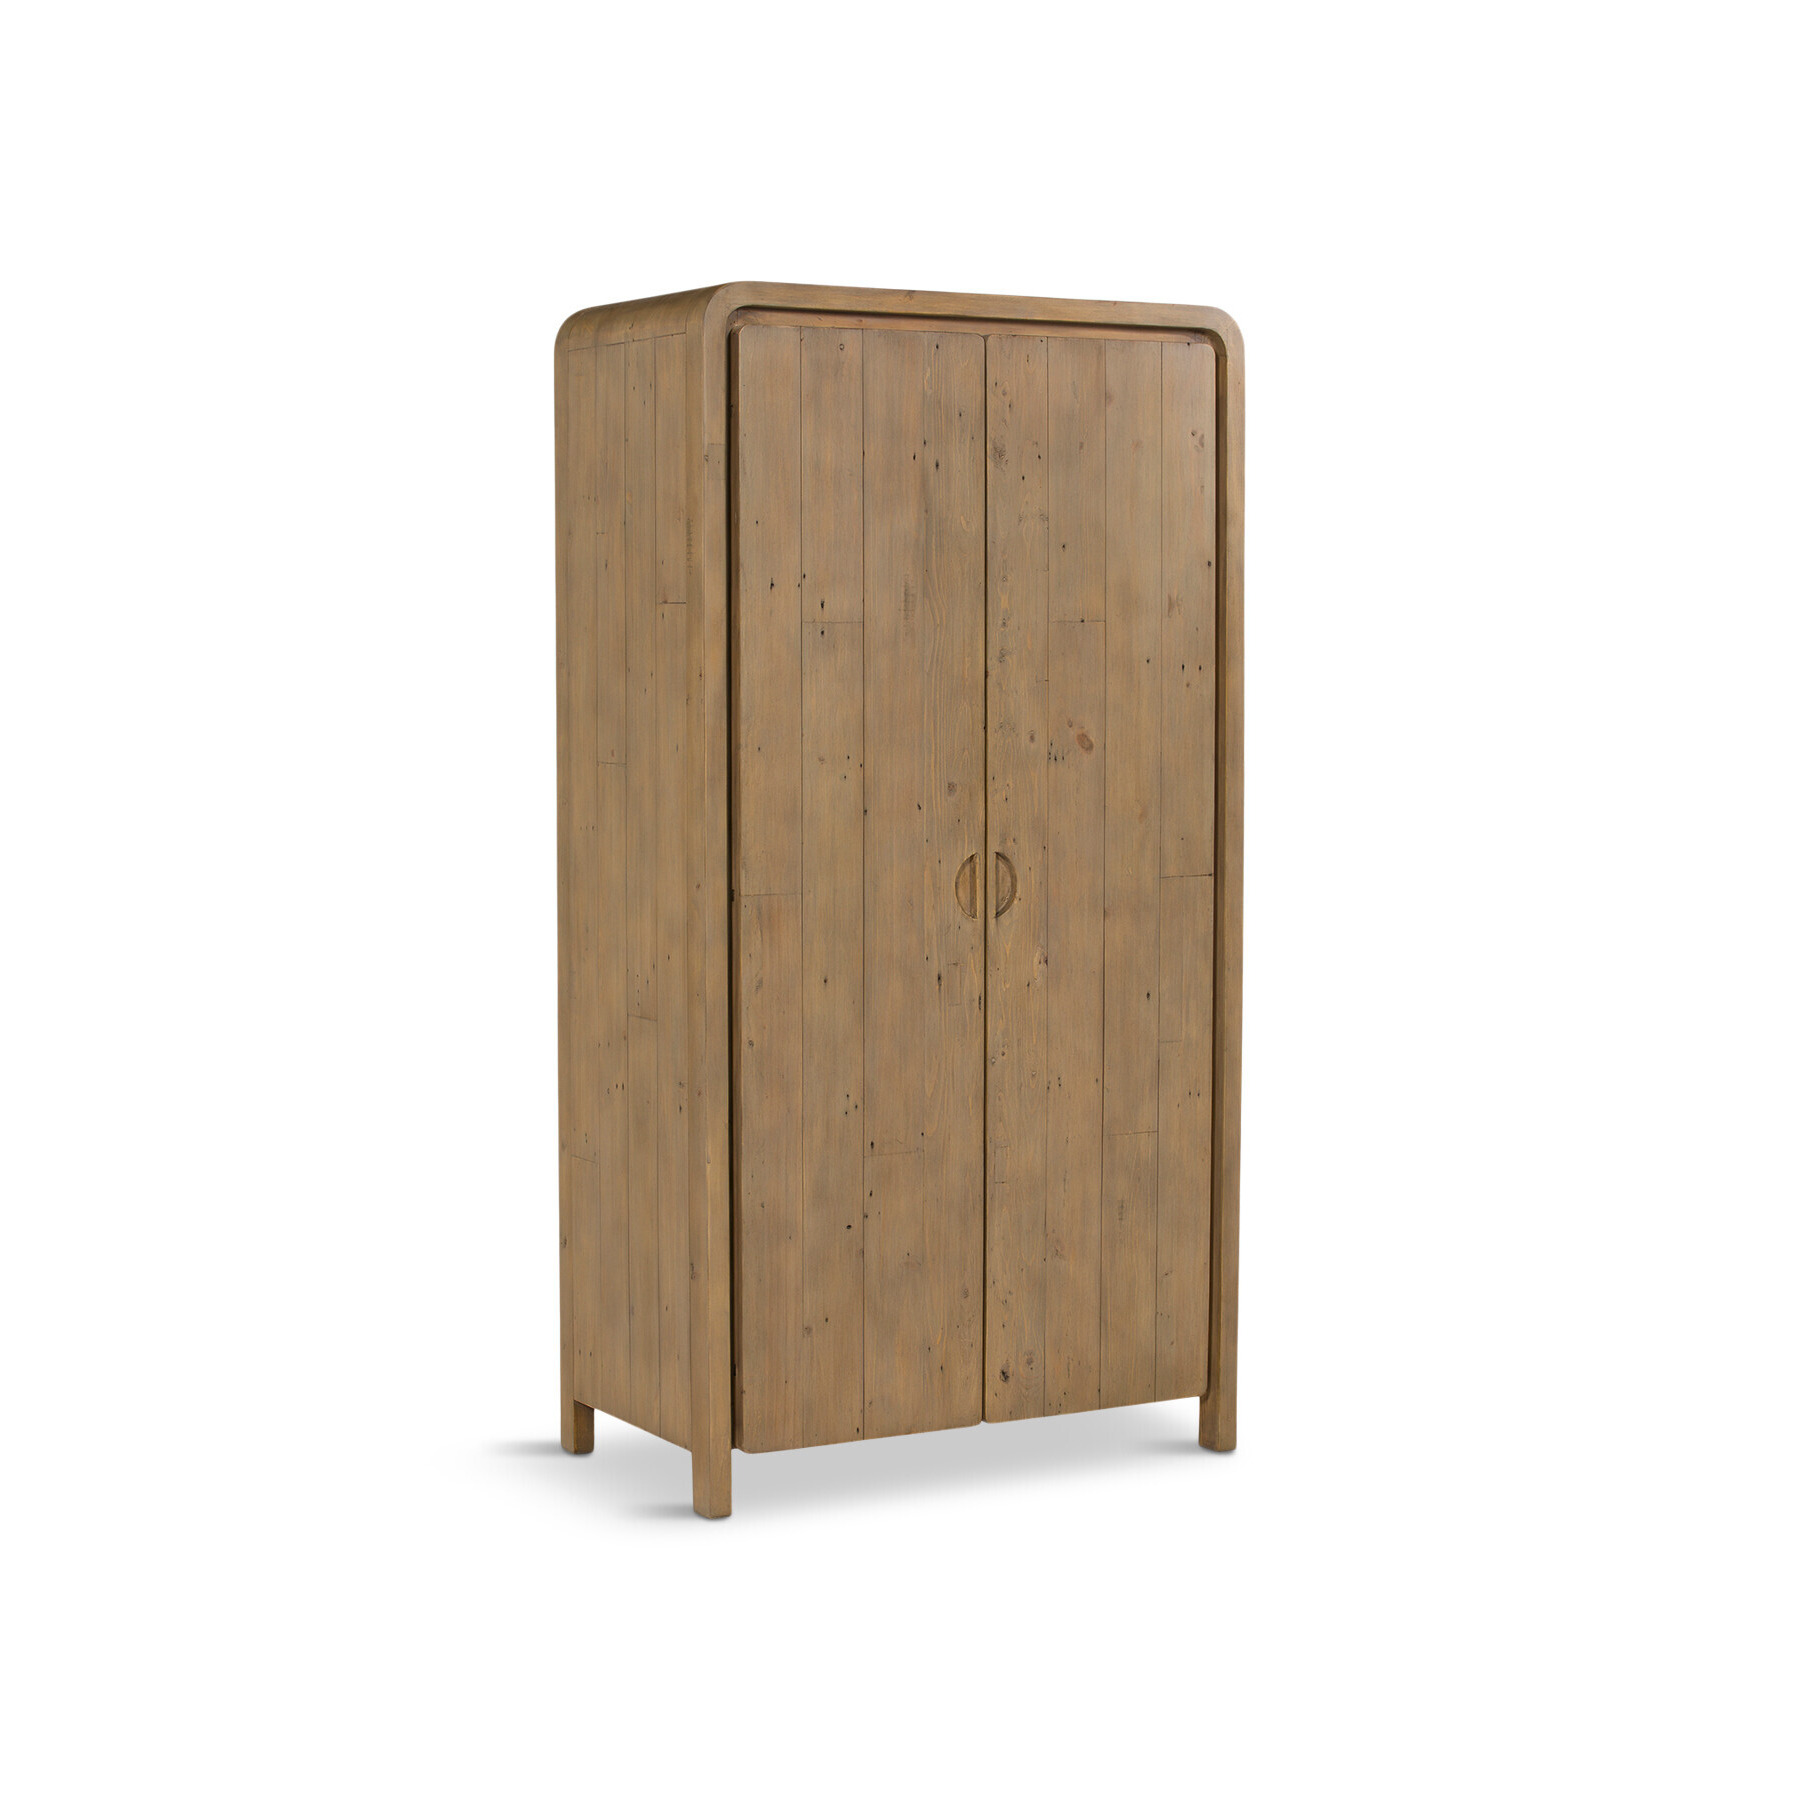 Barker and Stonehouse Tosca Reclaimed Wood 2 Door Wardrobe Brown - image 1